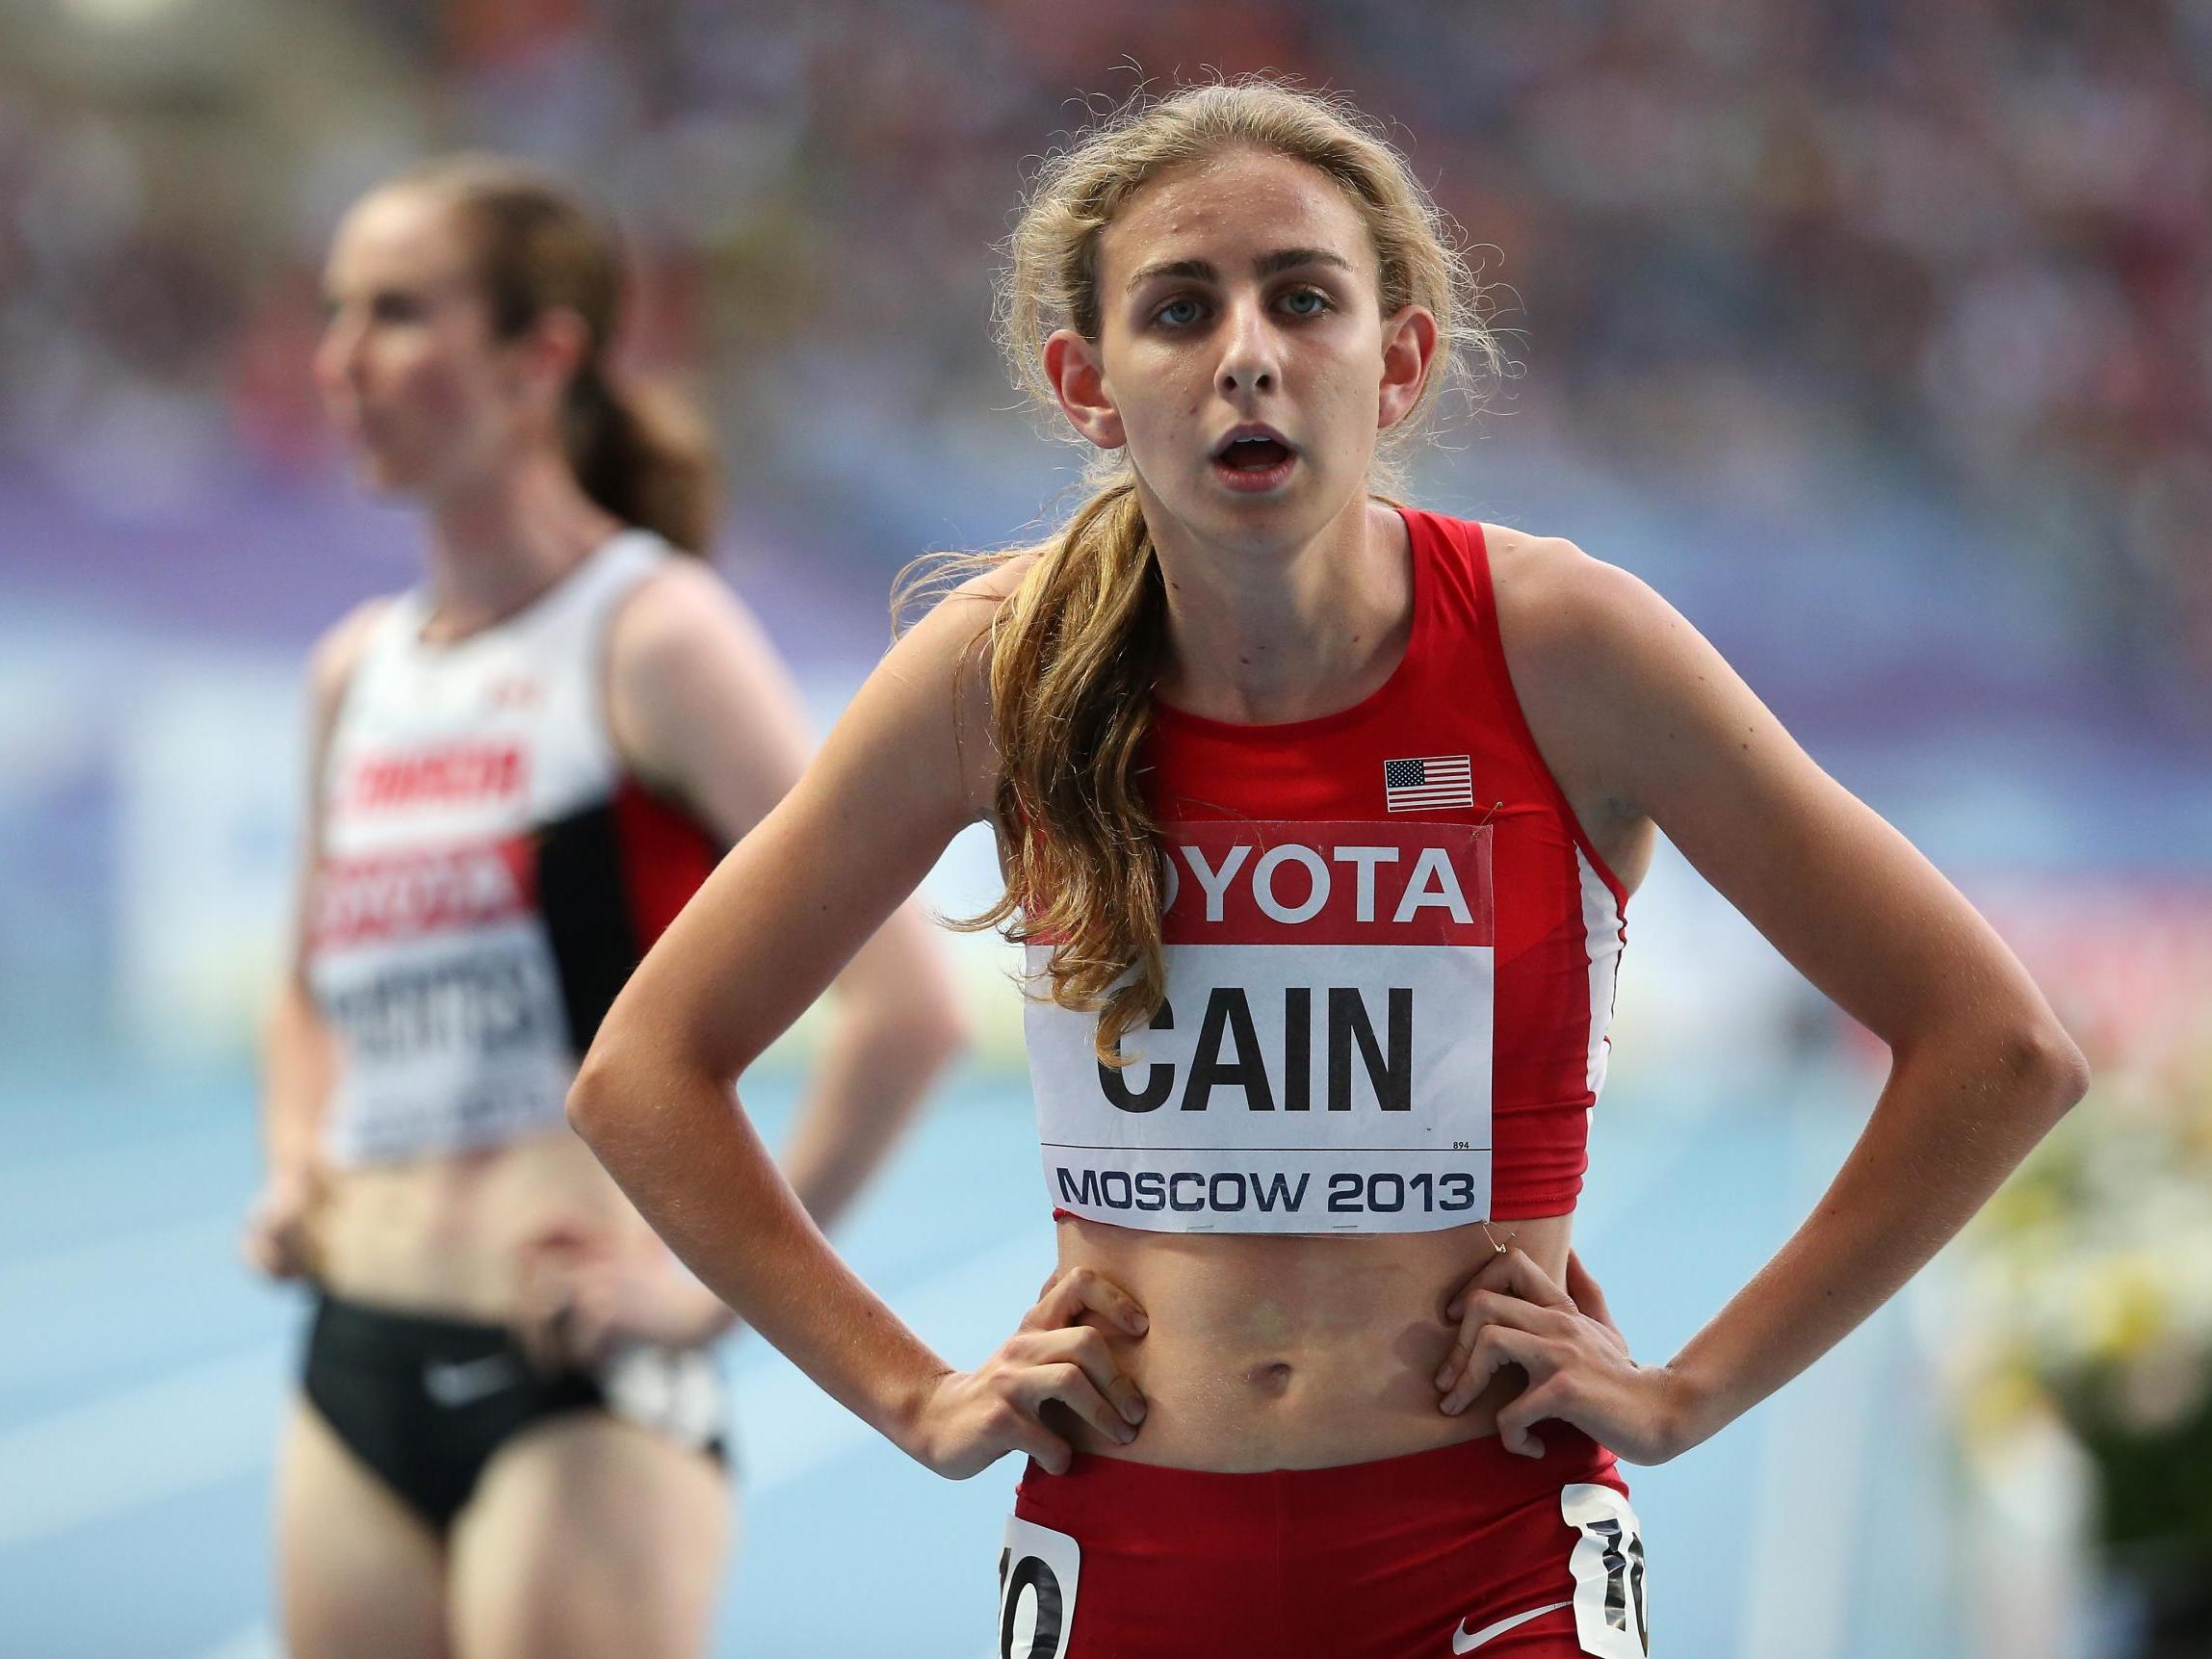 Mary Cain: US athlete accuses Alberto Salazar and Nike of